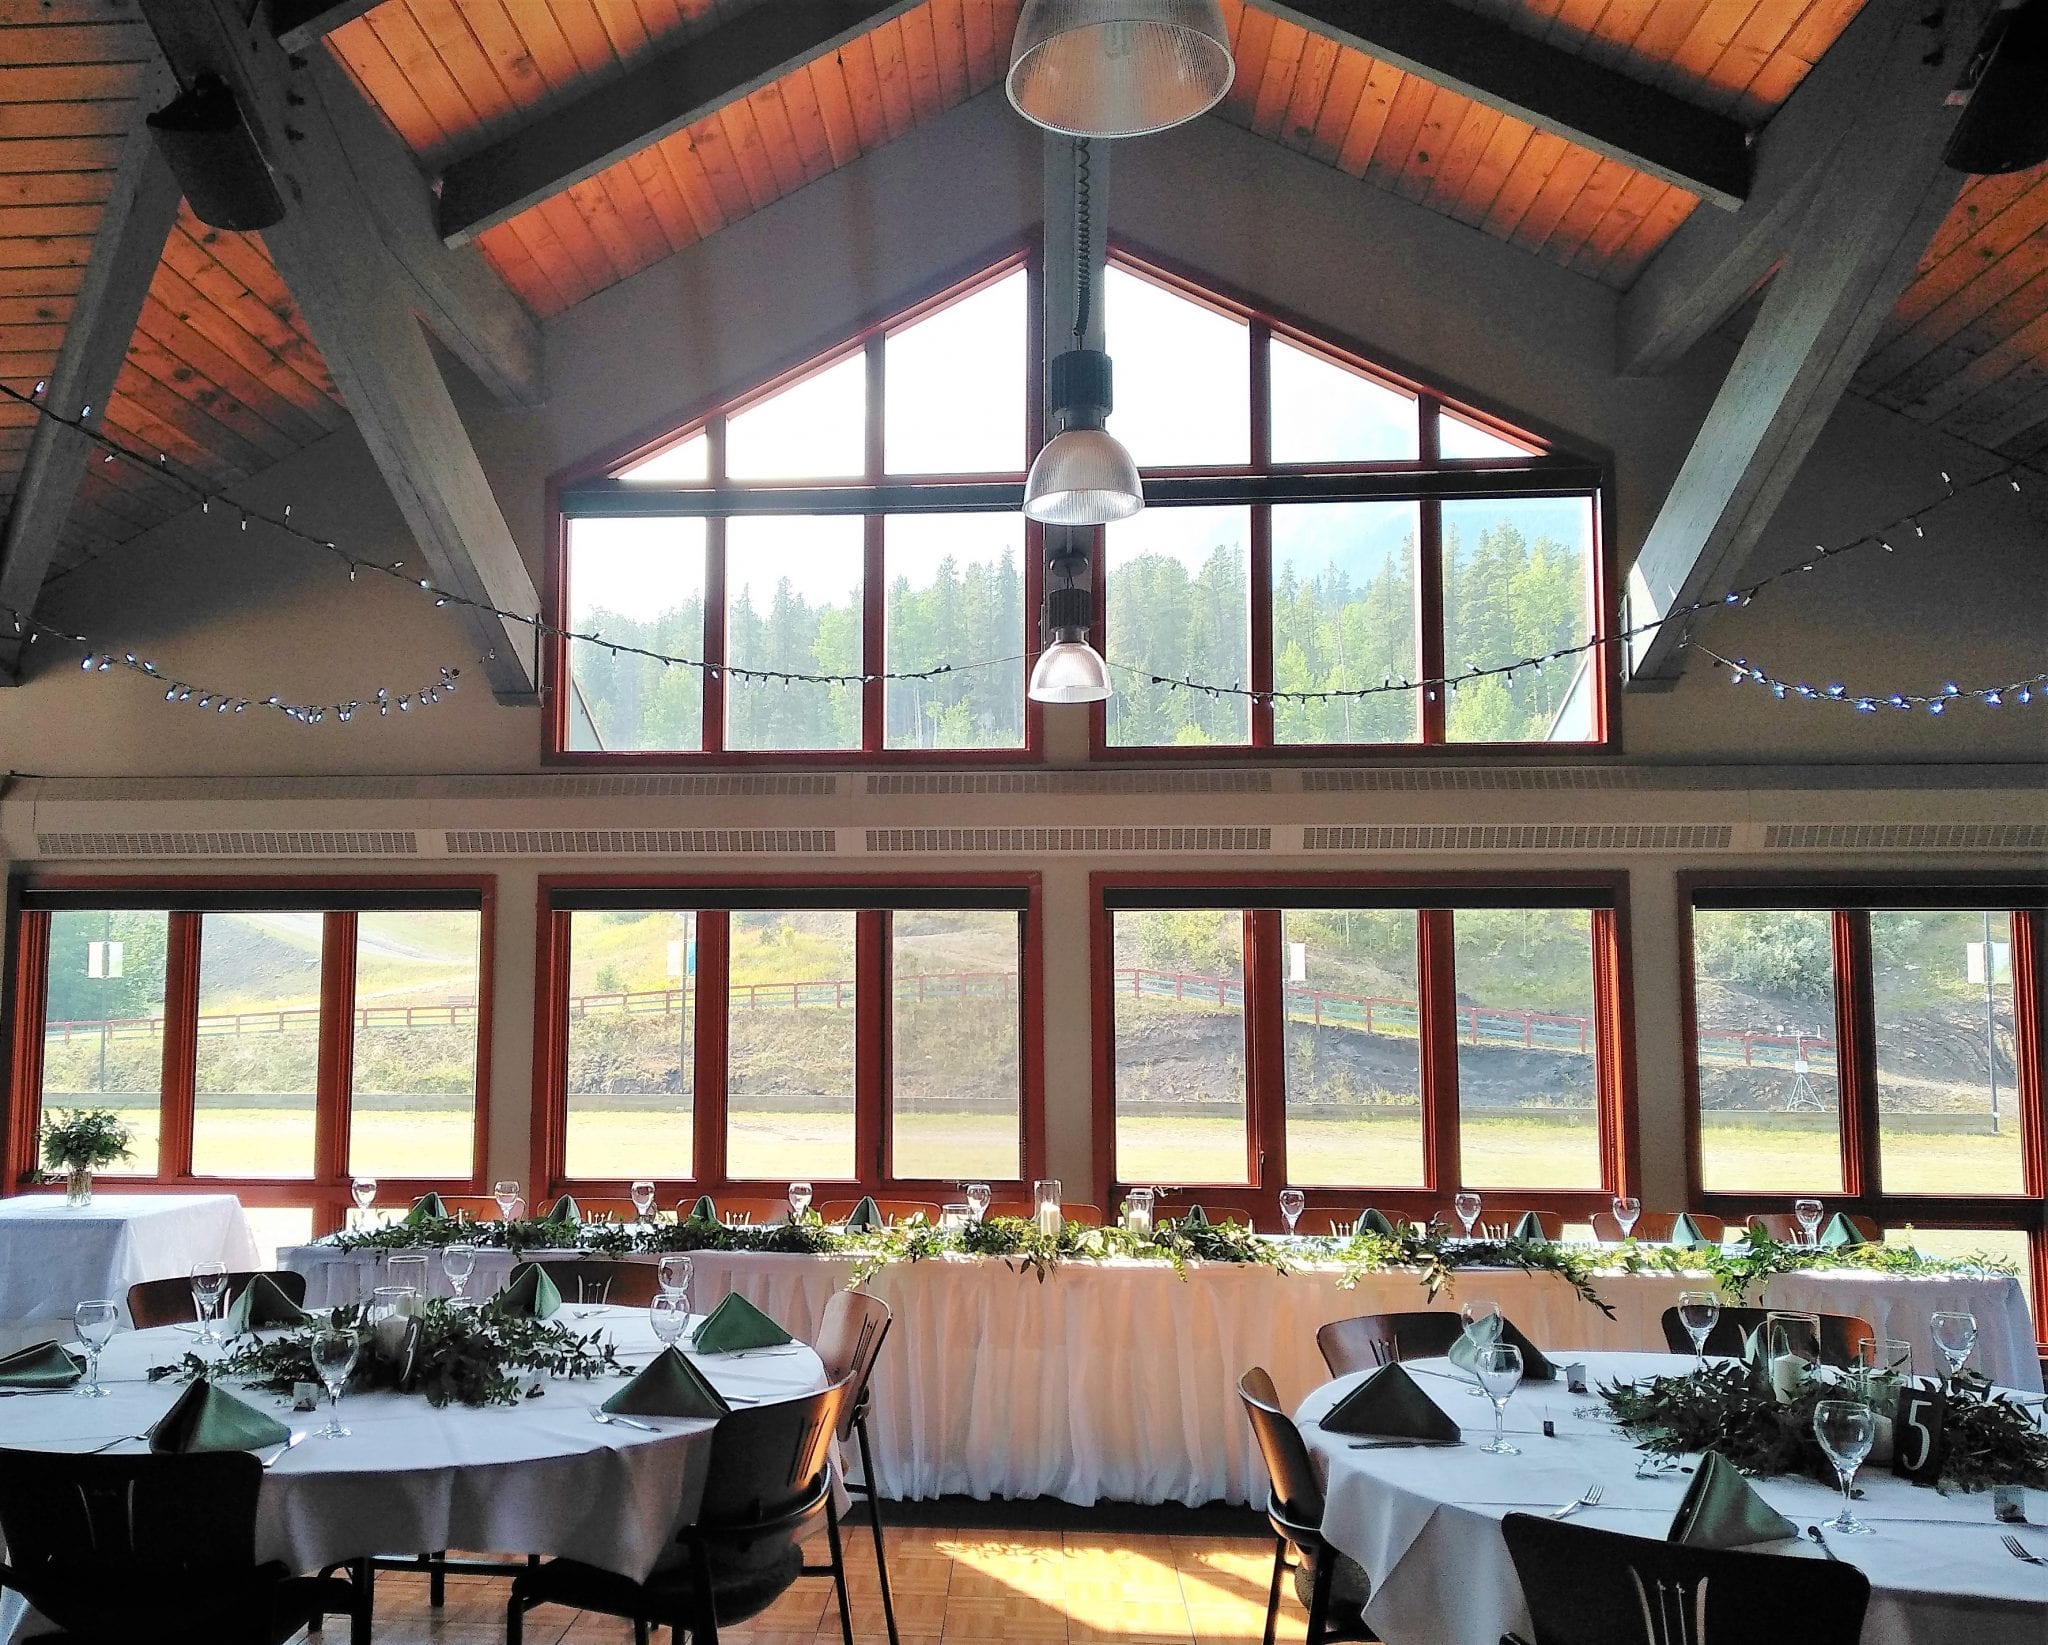 Wedding Packages and Venues in Canmore Alberta - Cornerstone Weddings